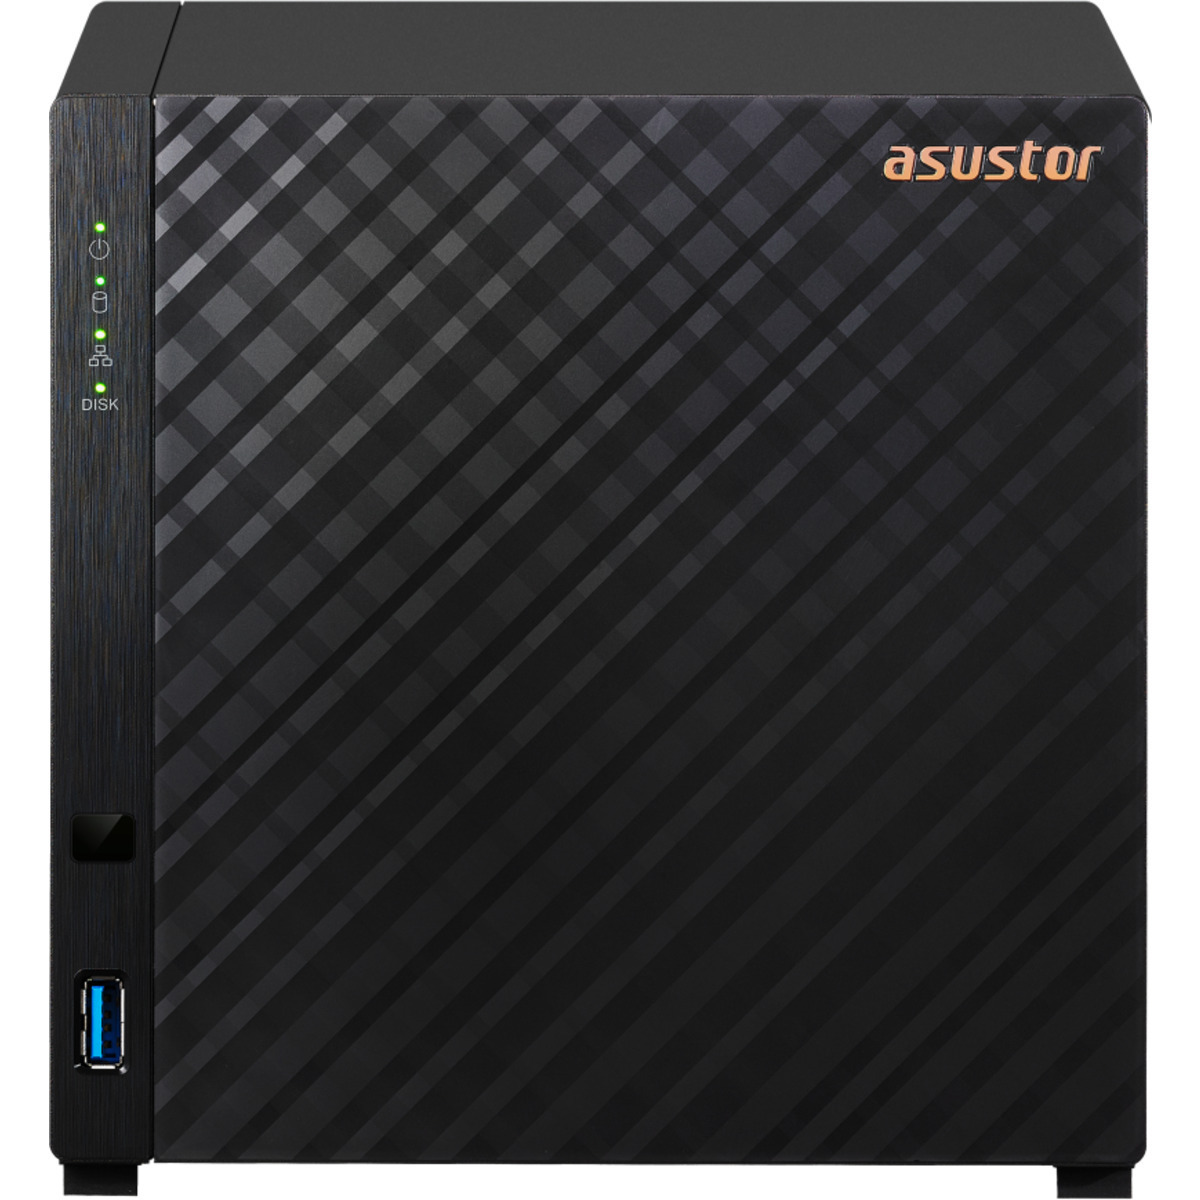 ASUSTOR DRIVESTOR 4 AS1104T 48tb 4-Bay Desktop Personal / Basic Home / Small Office NAS - Network Attached Storage Device 2x24tb Western Digital Red Pro WD240KFGX 3.5 7200rpm SATA 6Gb/s HDD NAS Class Drives Installed - Burn-In Tested DRIVESTOR 4 AS1104T